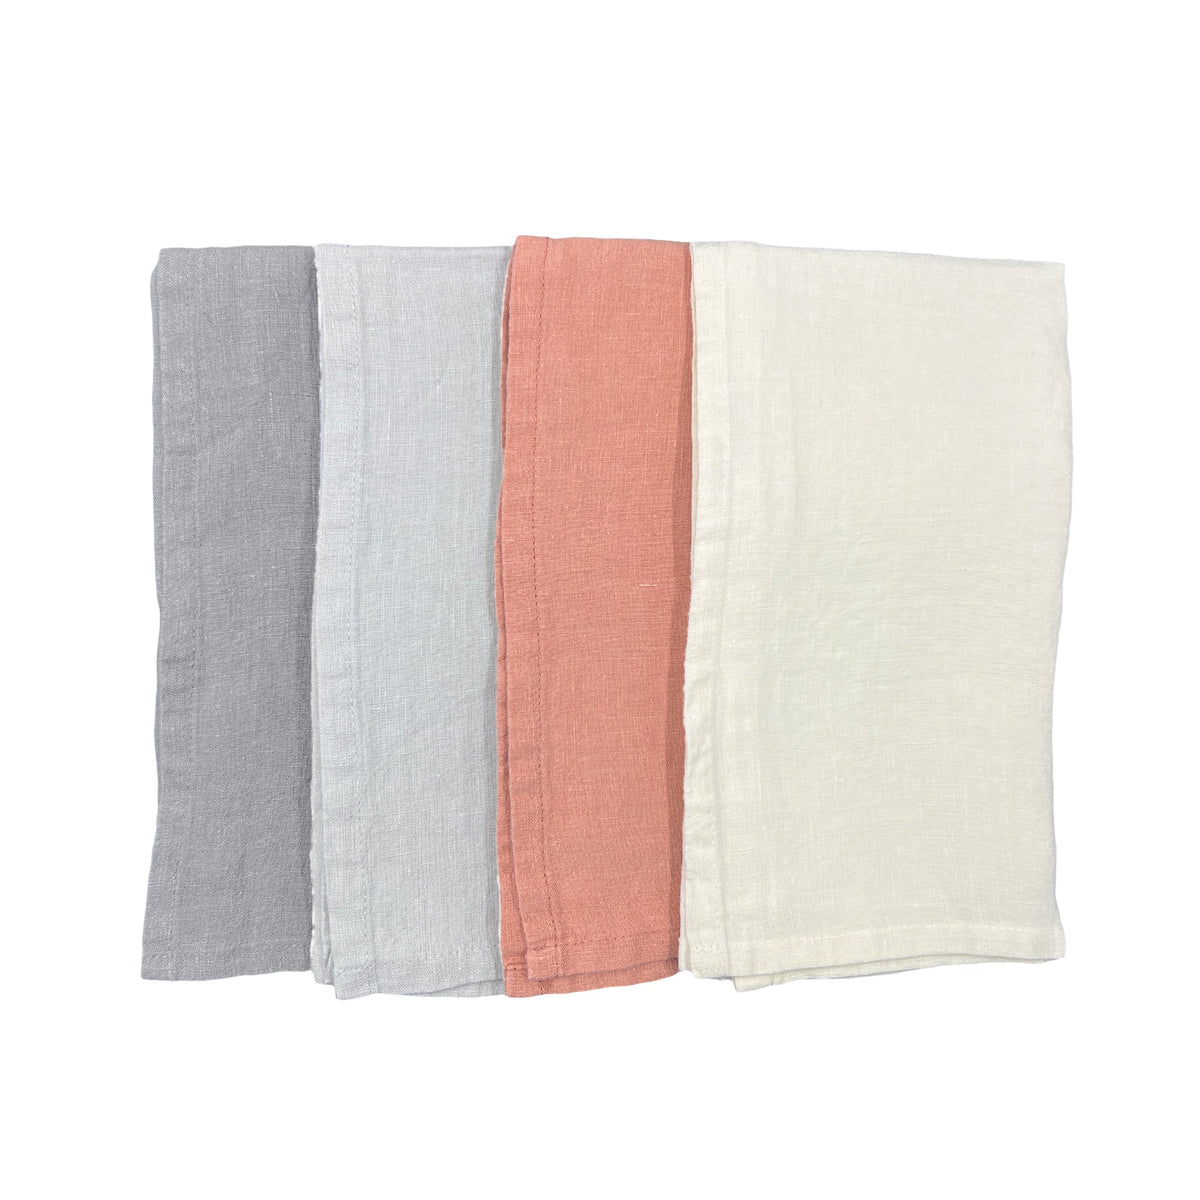 Stone Washed Linen Napkin in Stone- Set of 4